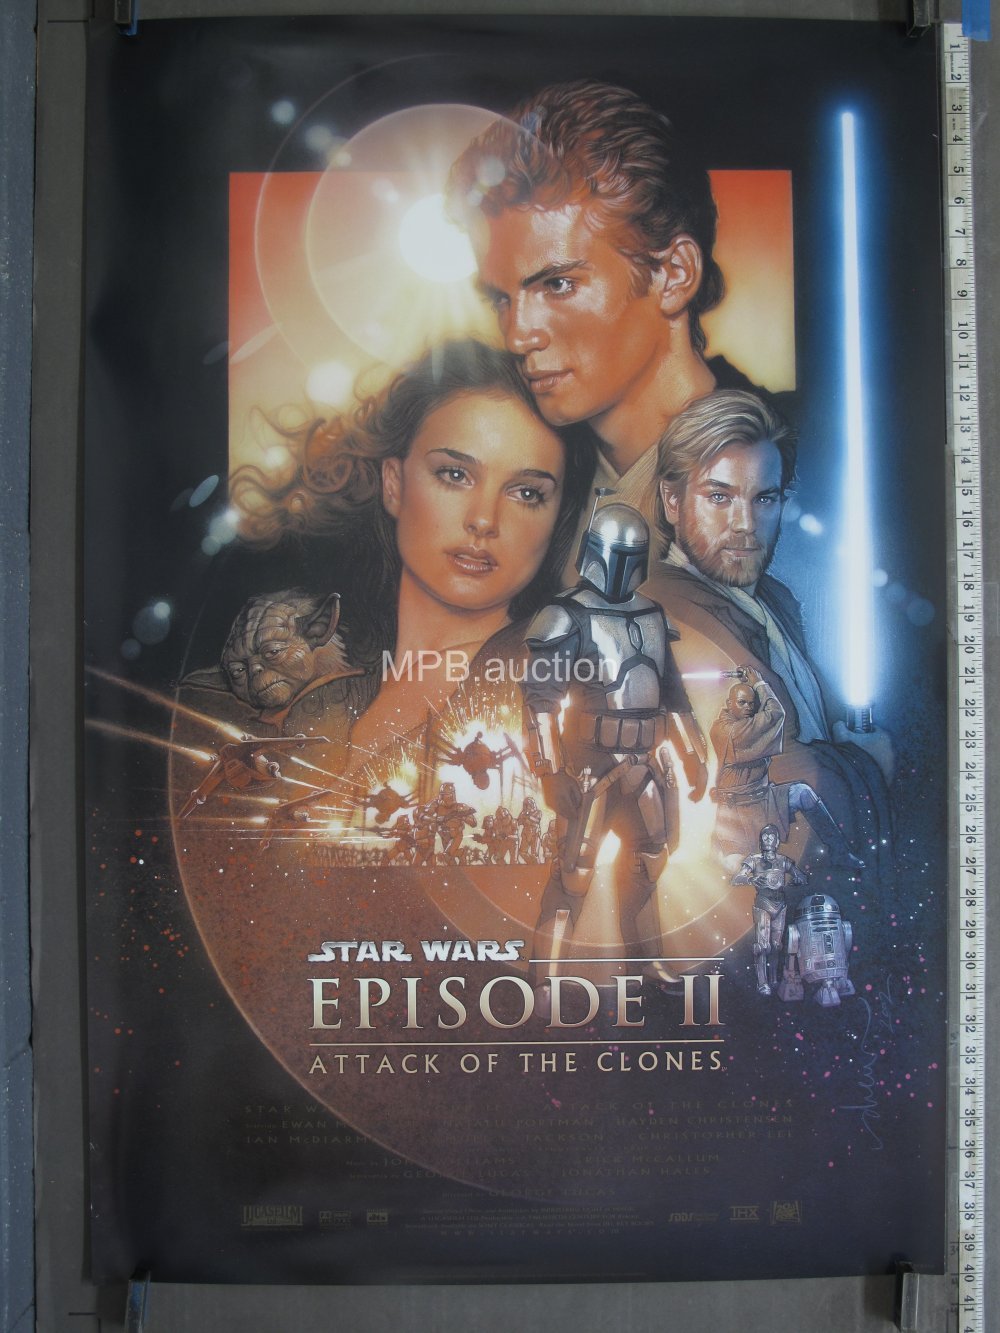 ORIGINAL MOVIE POSTER 2002 STAR WARS EPISODE 2: ATTACK OF THE CLONES ROLLED